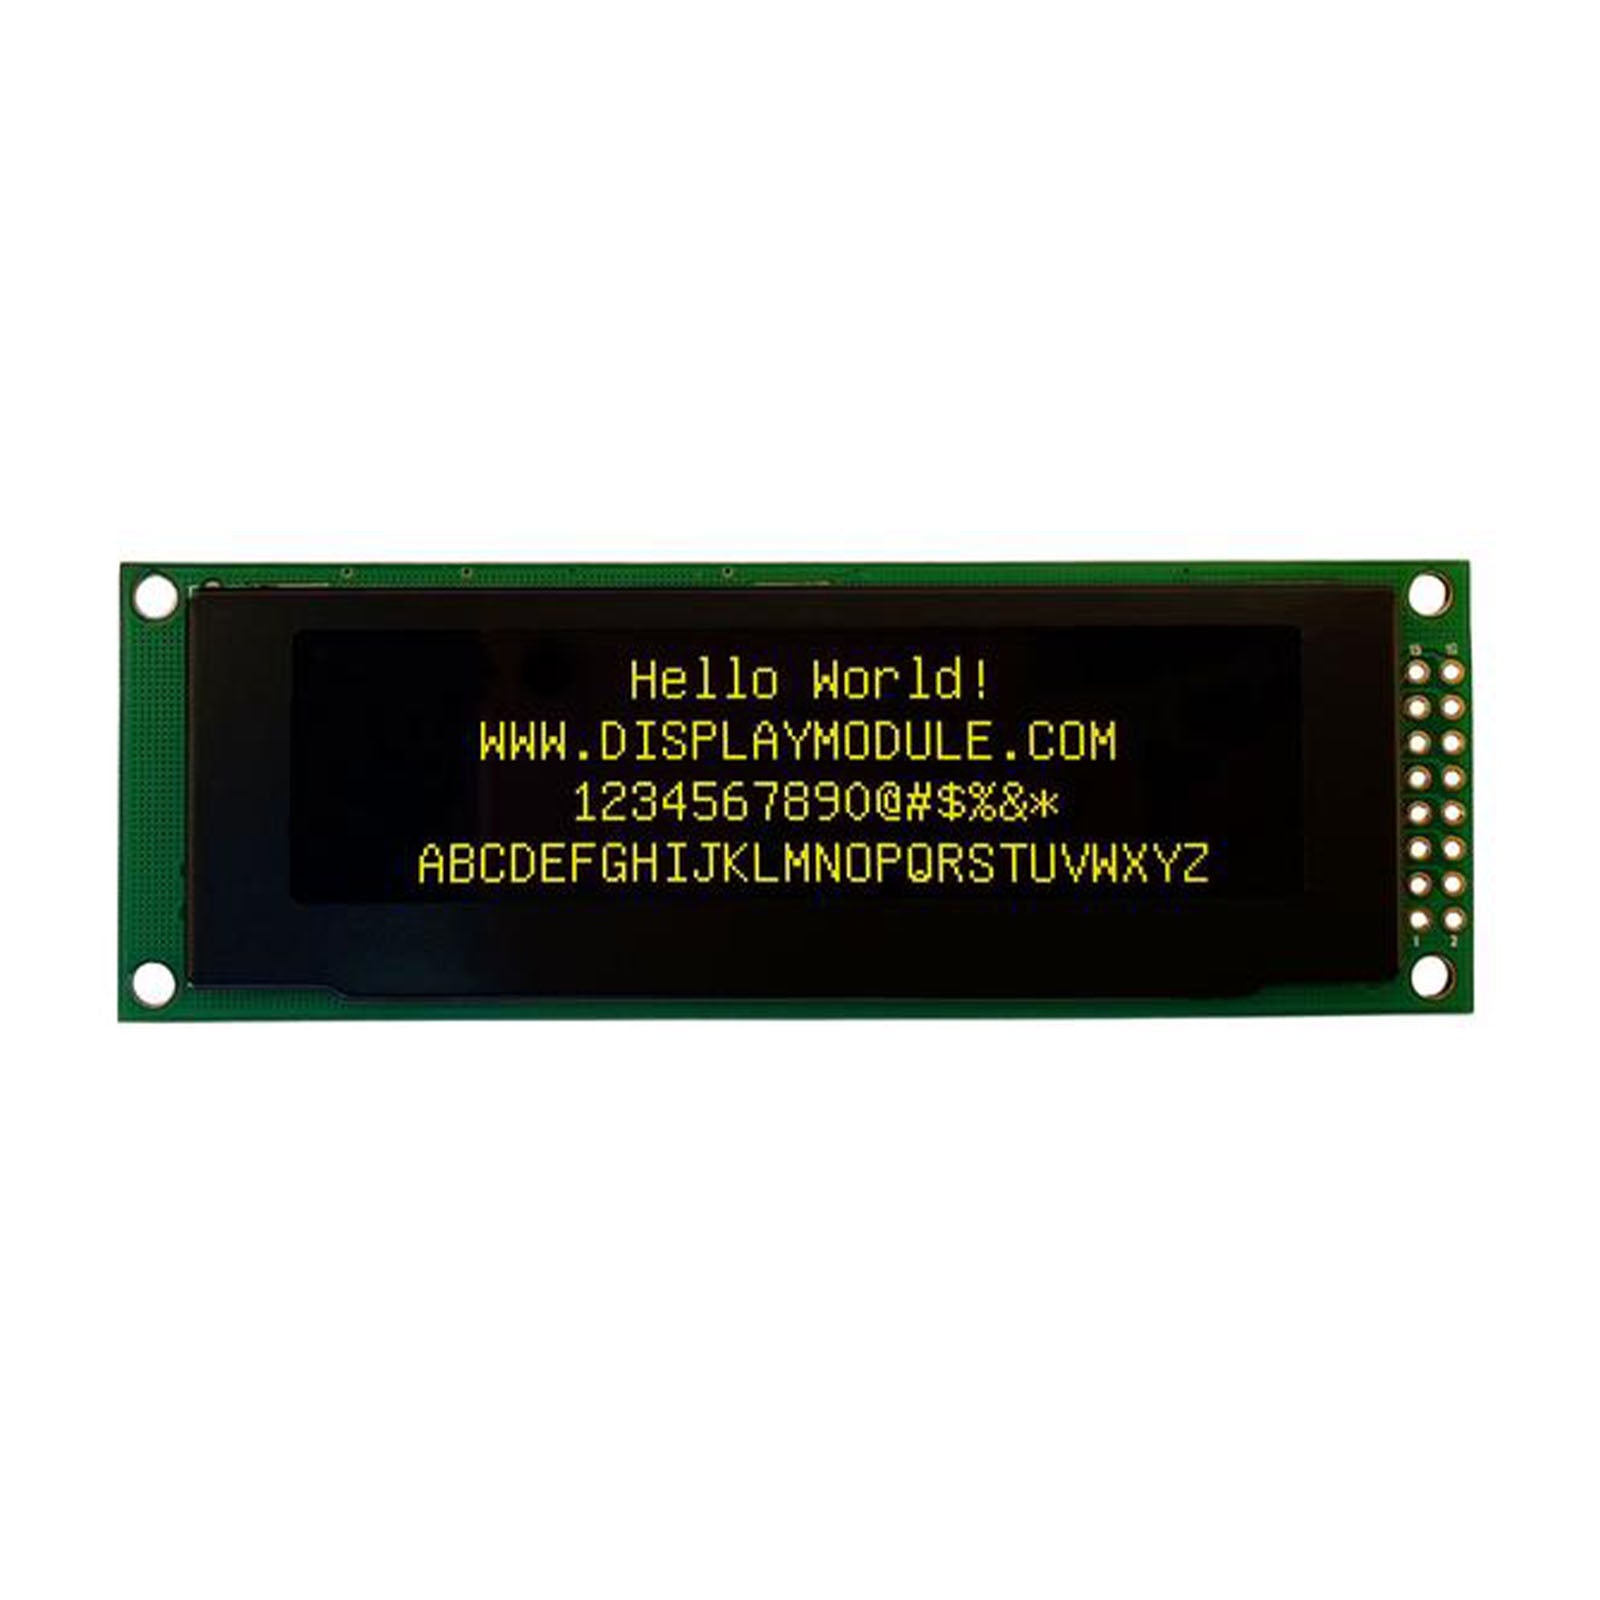 3.2 inch 256x64 yellow OLED screen displaying the text 'Hello World!'